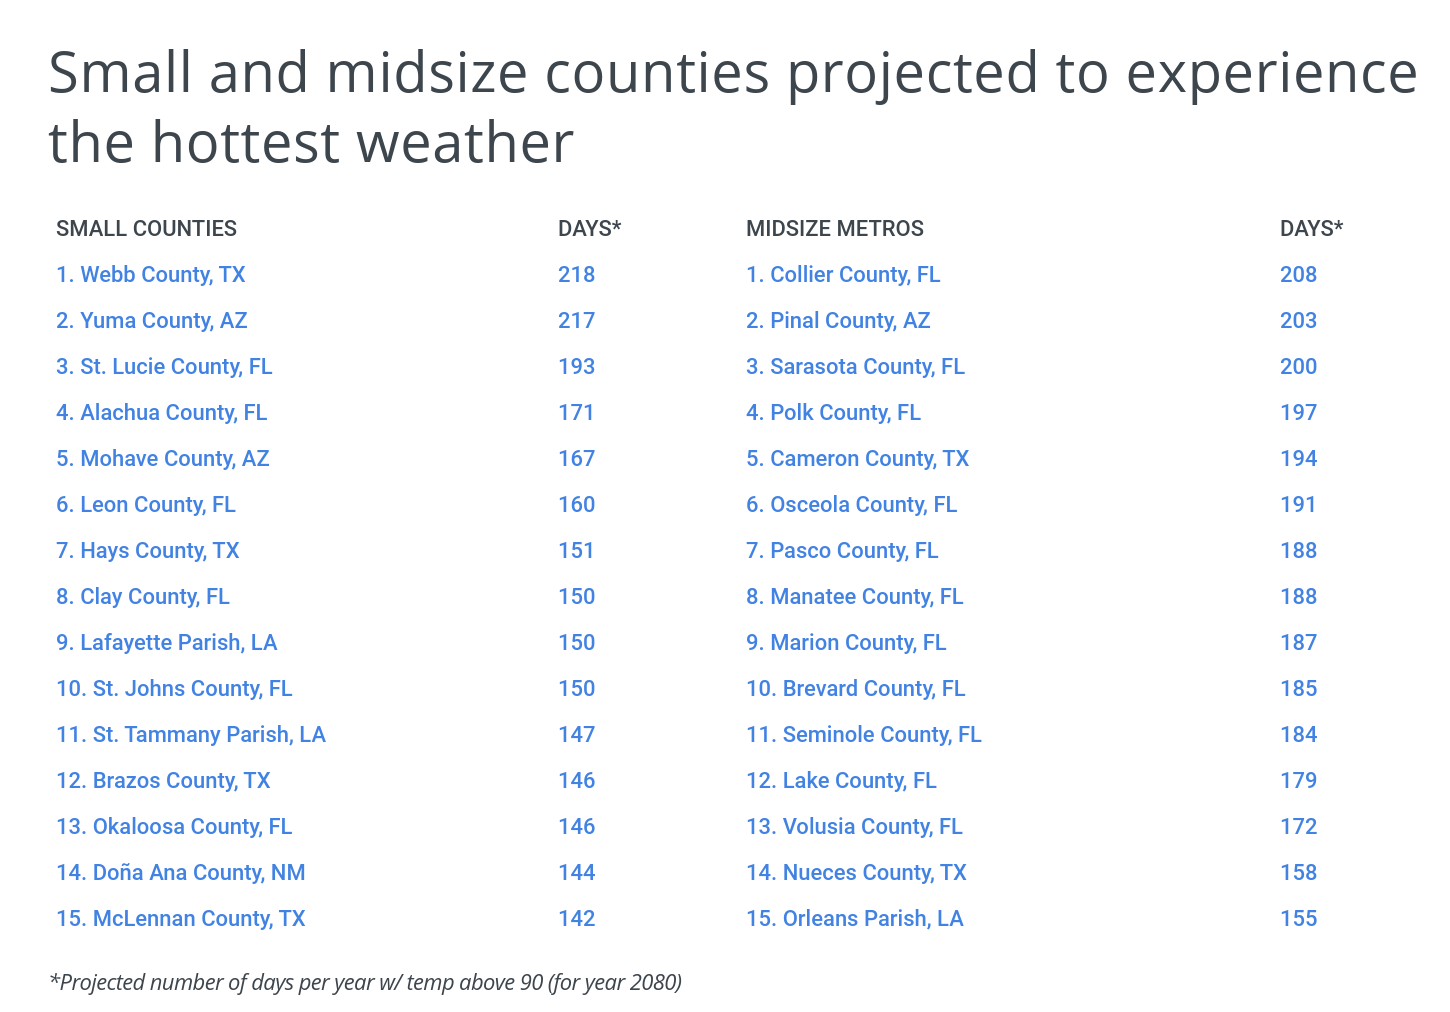 Small and midsize counties projected to experience the hottest weather